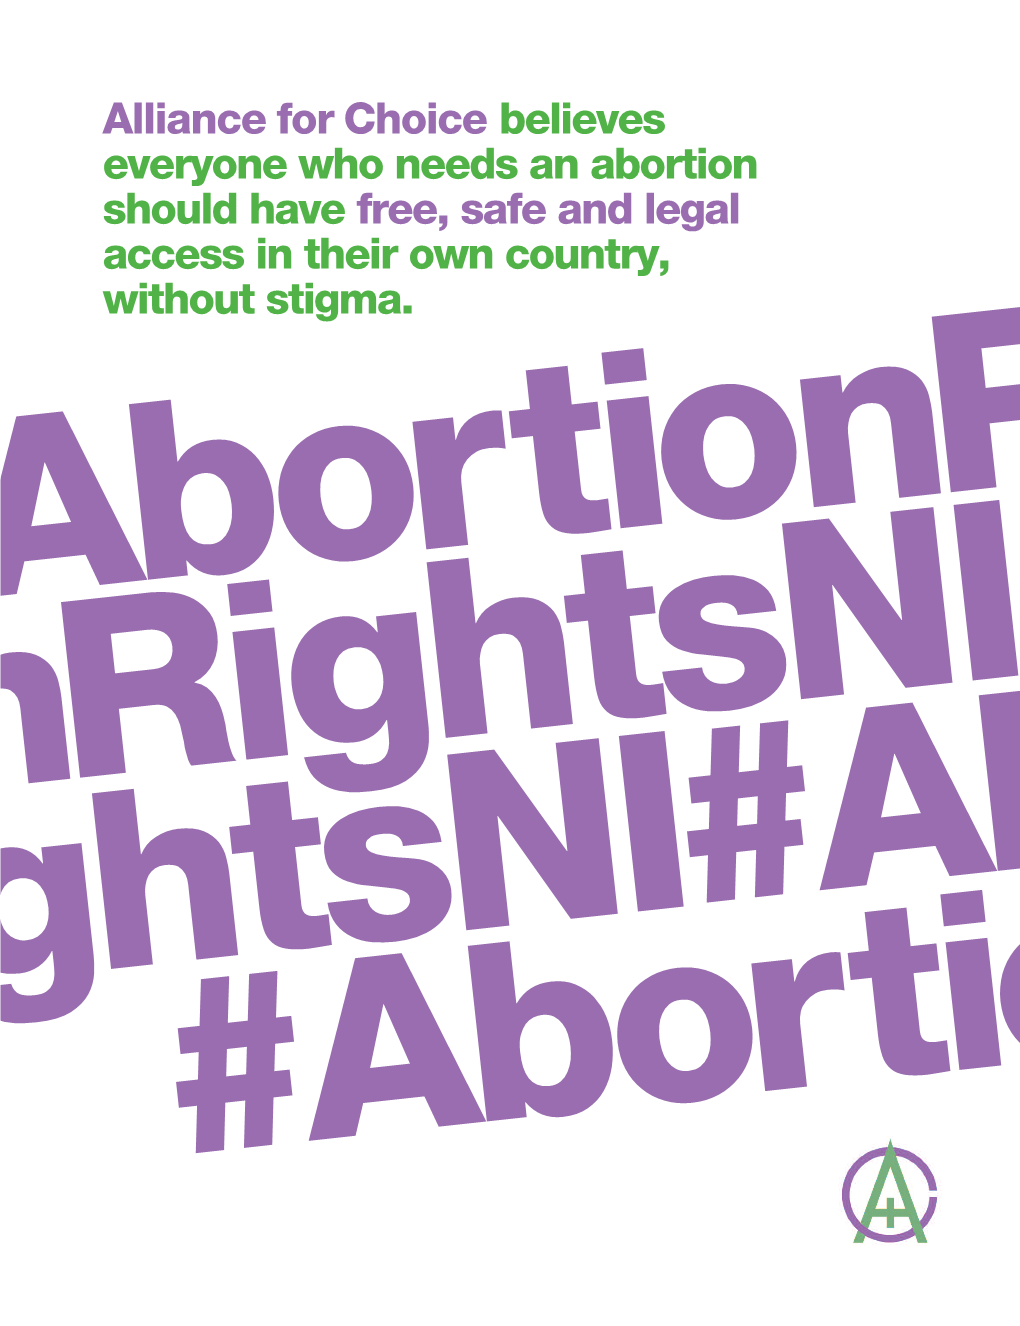 Alliance for Choice Believes Everyone Who Needs an Abortion Should Have Free, Safe and Legal Access in Their Own Country, Without Stigma